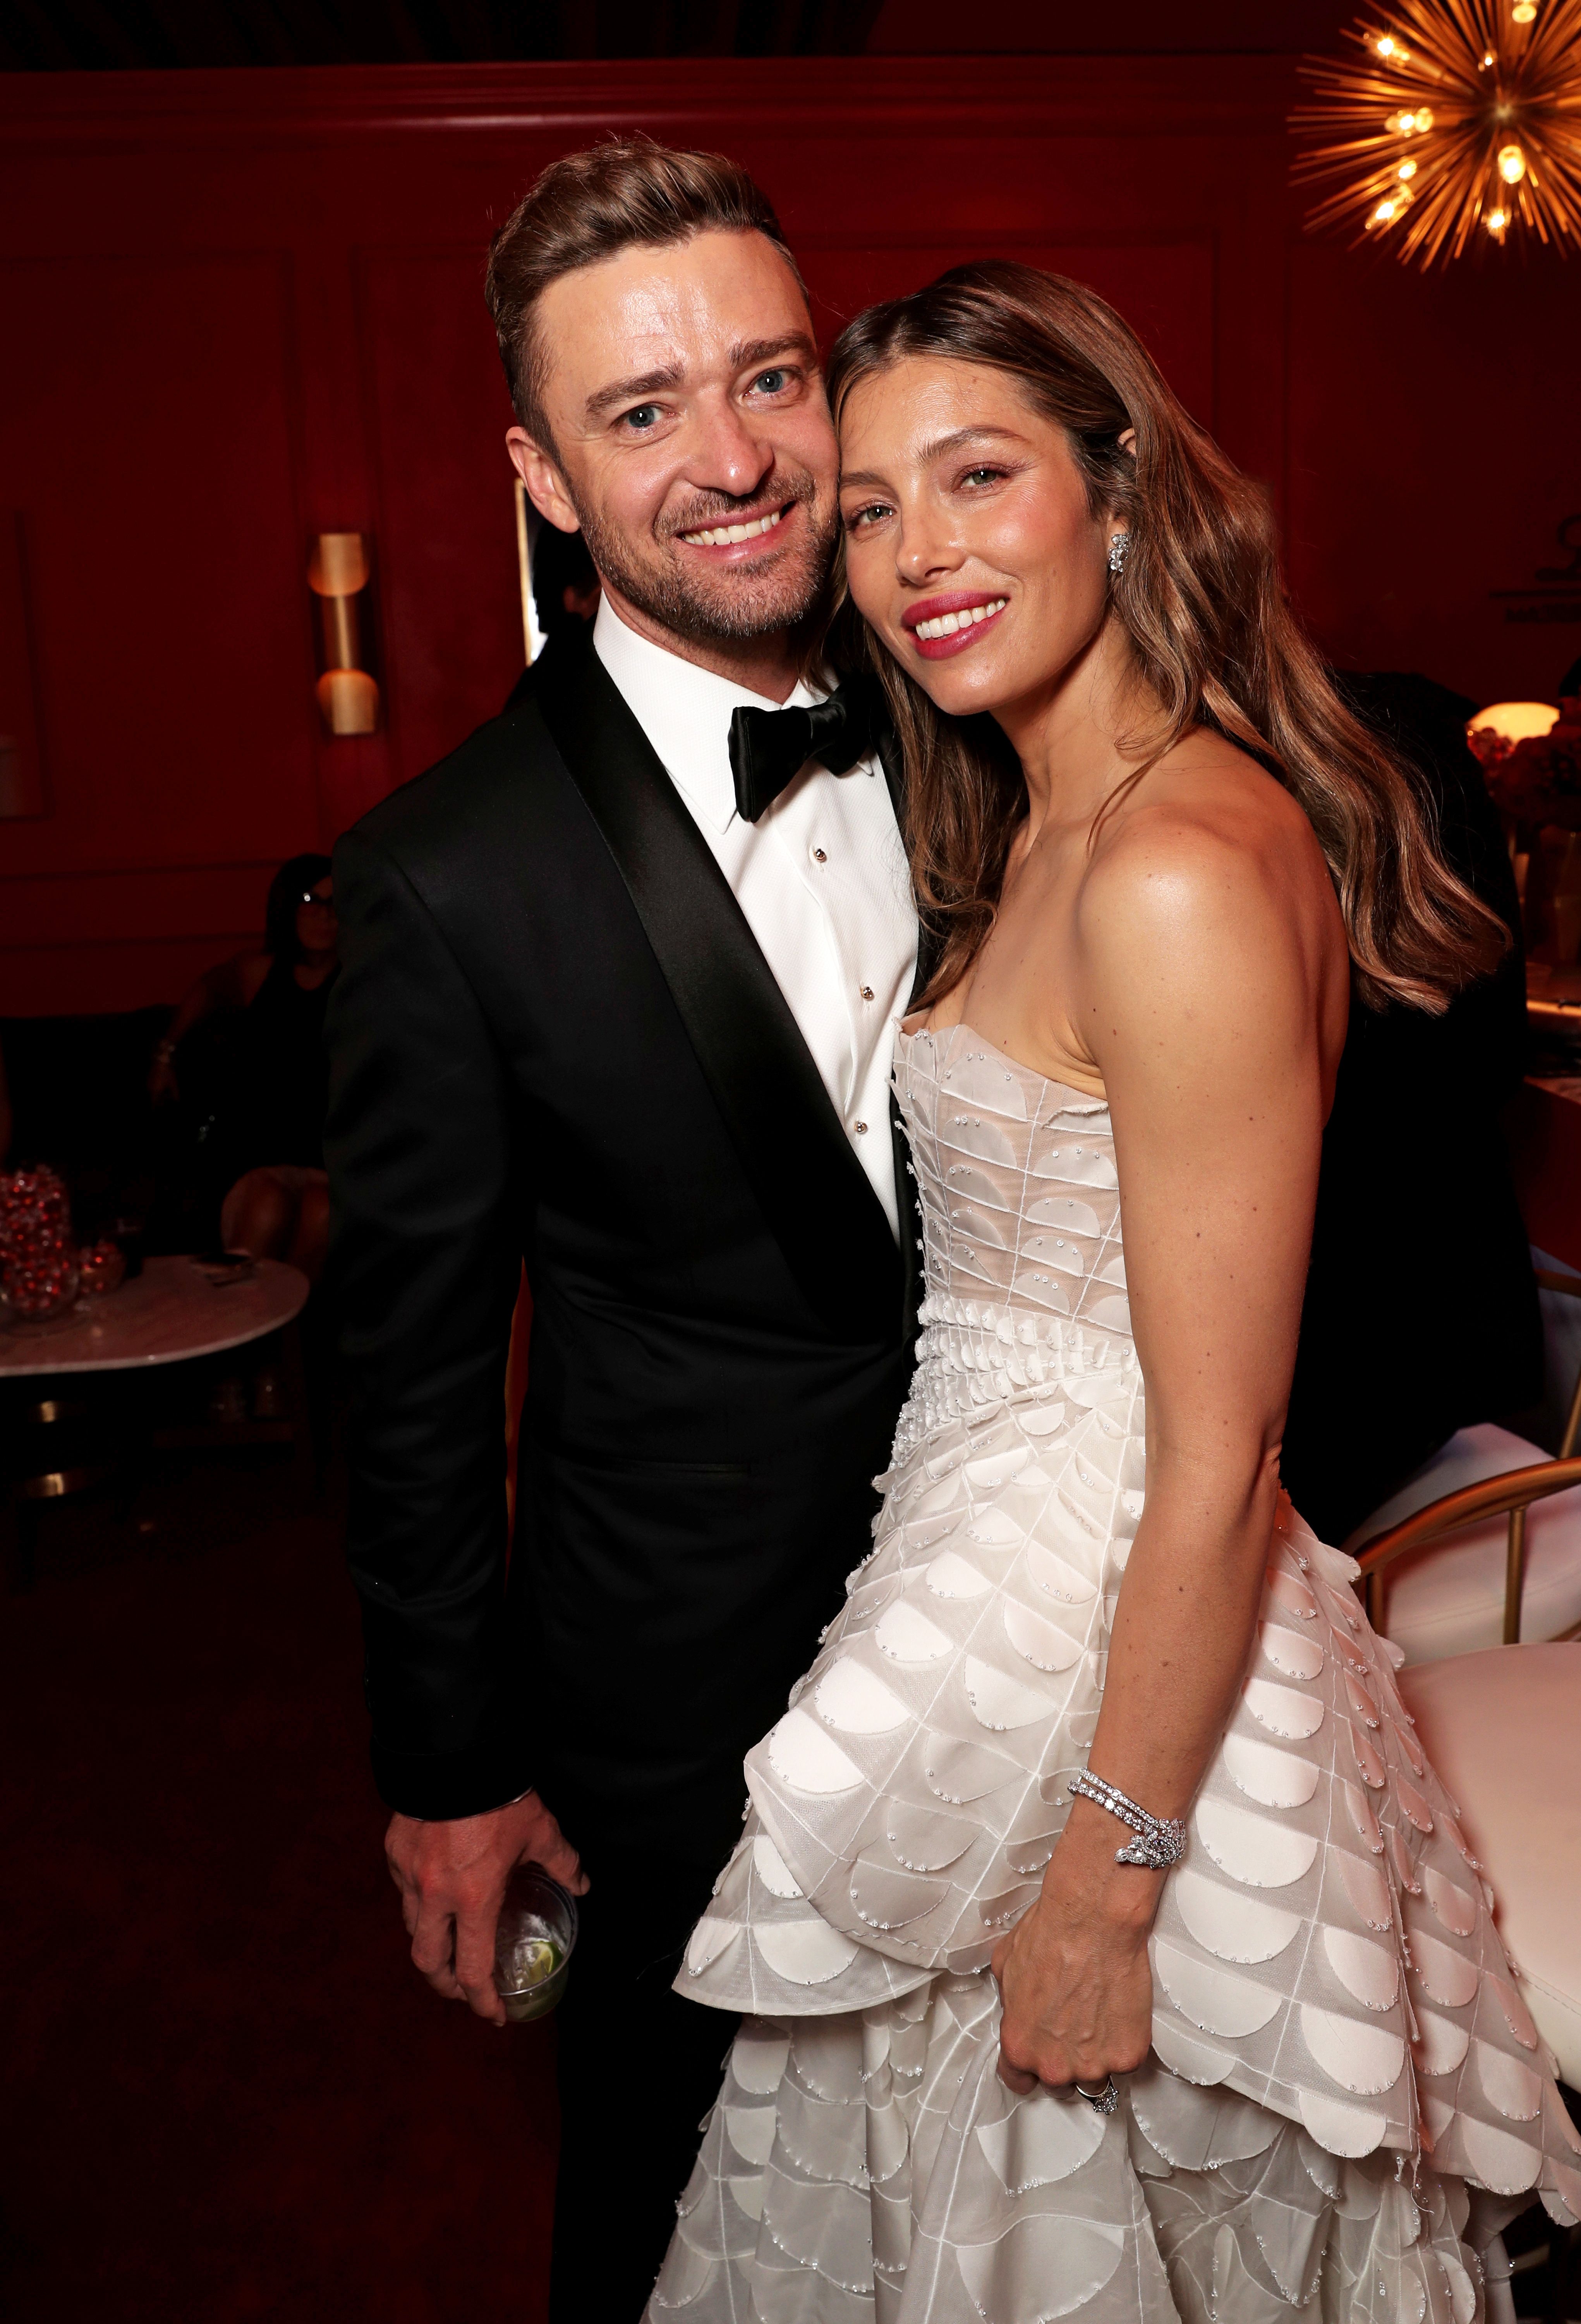 Justin Timberlake confirms welcoming second child with Jessica Biel